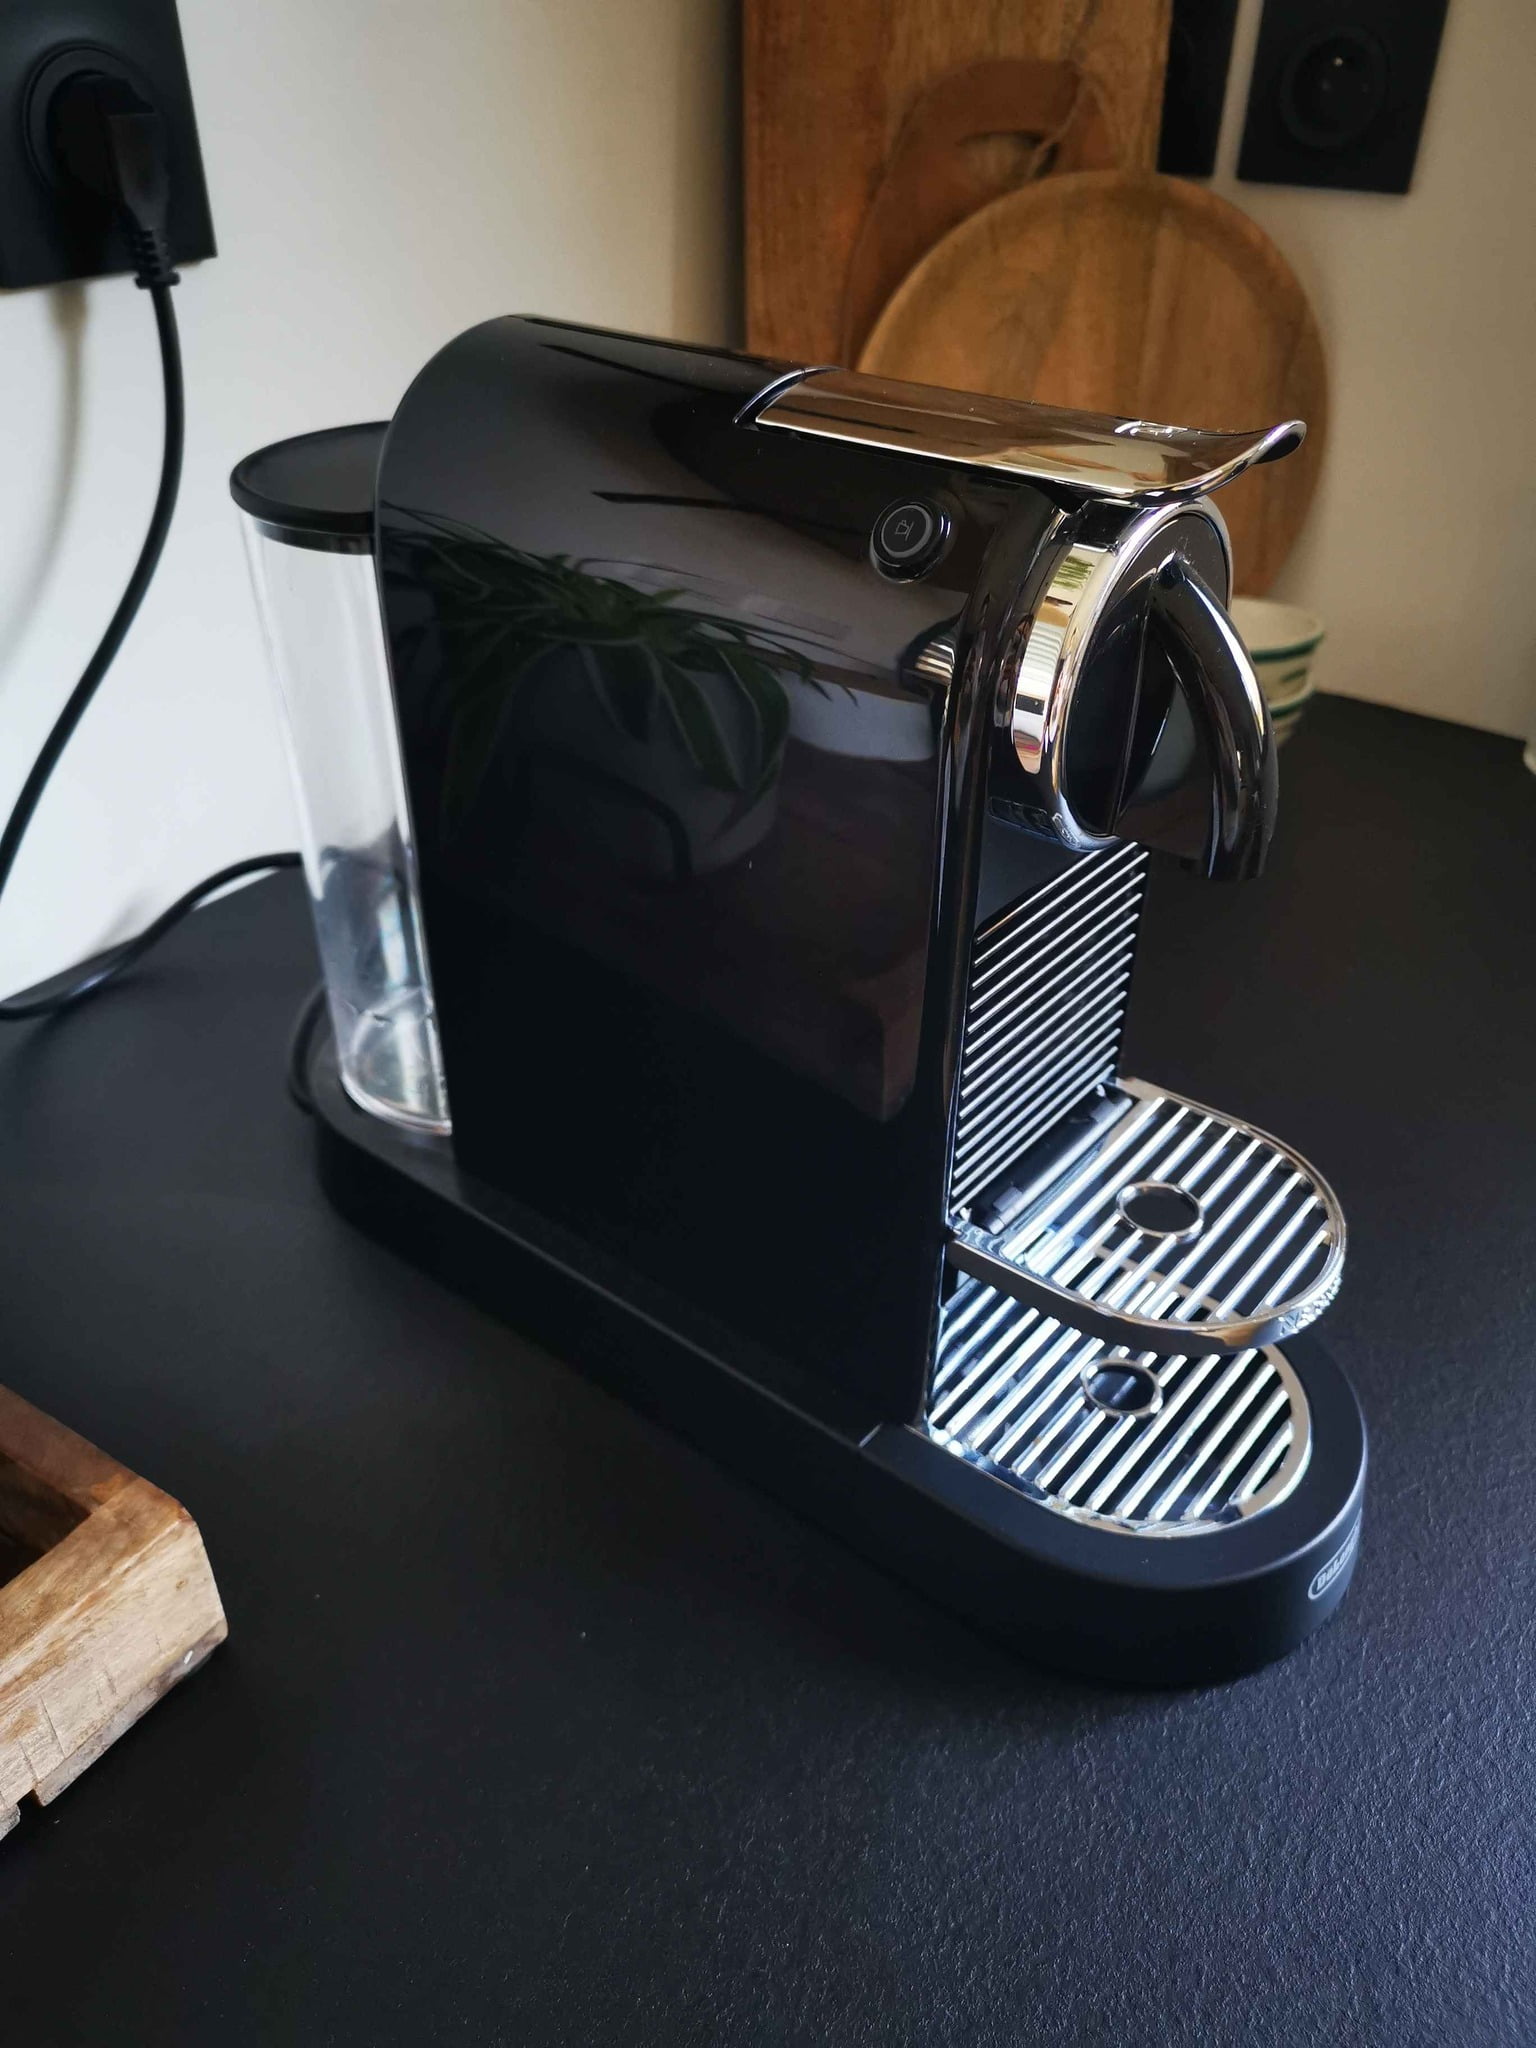 Nespresso Citiz has two tiers of cup holders